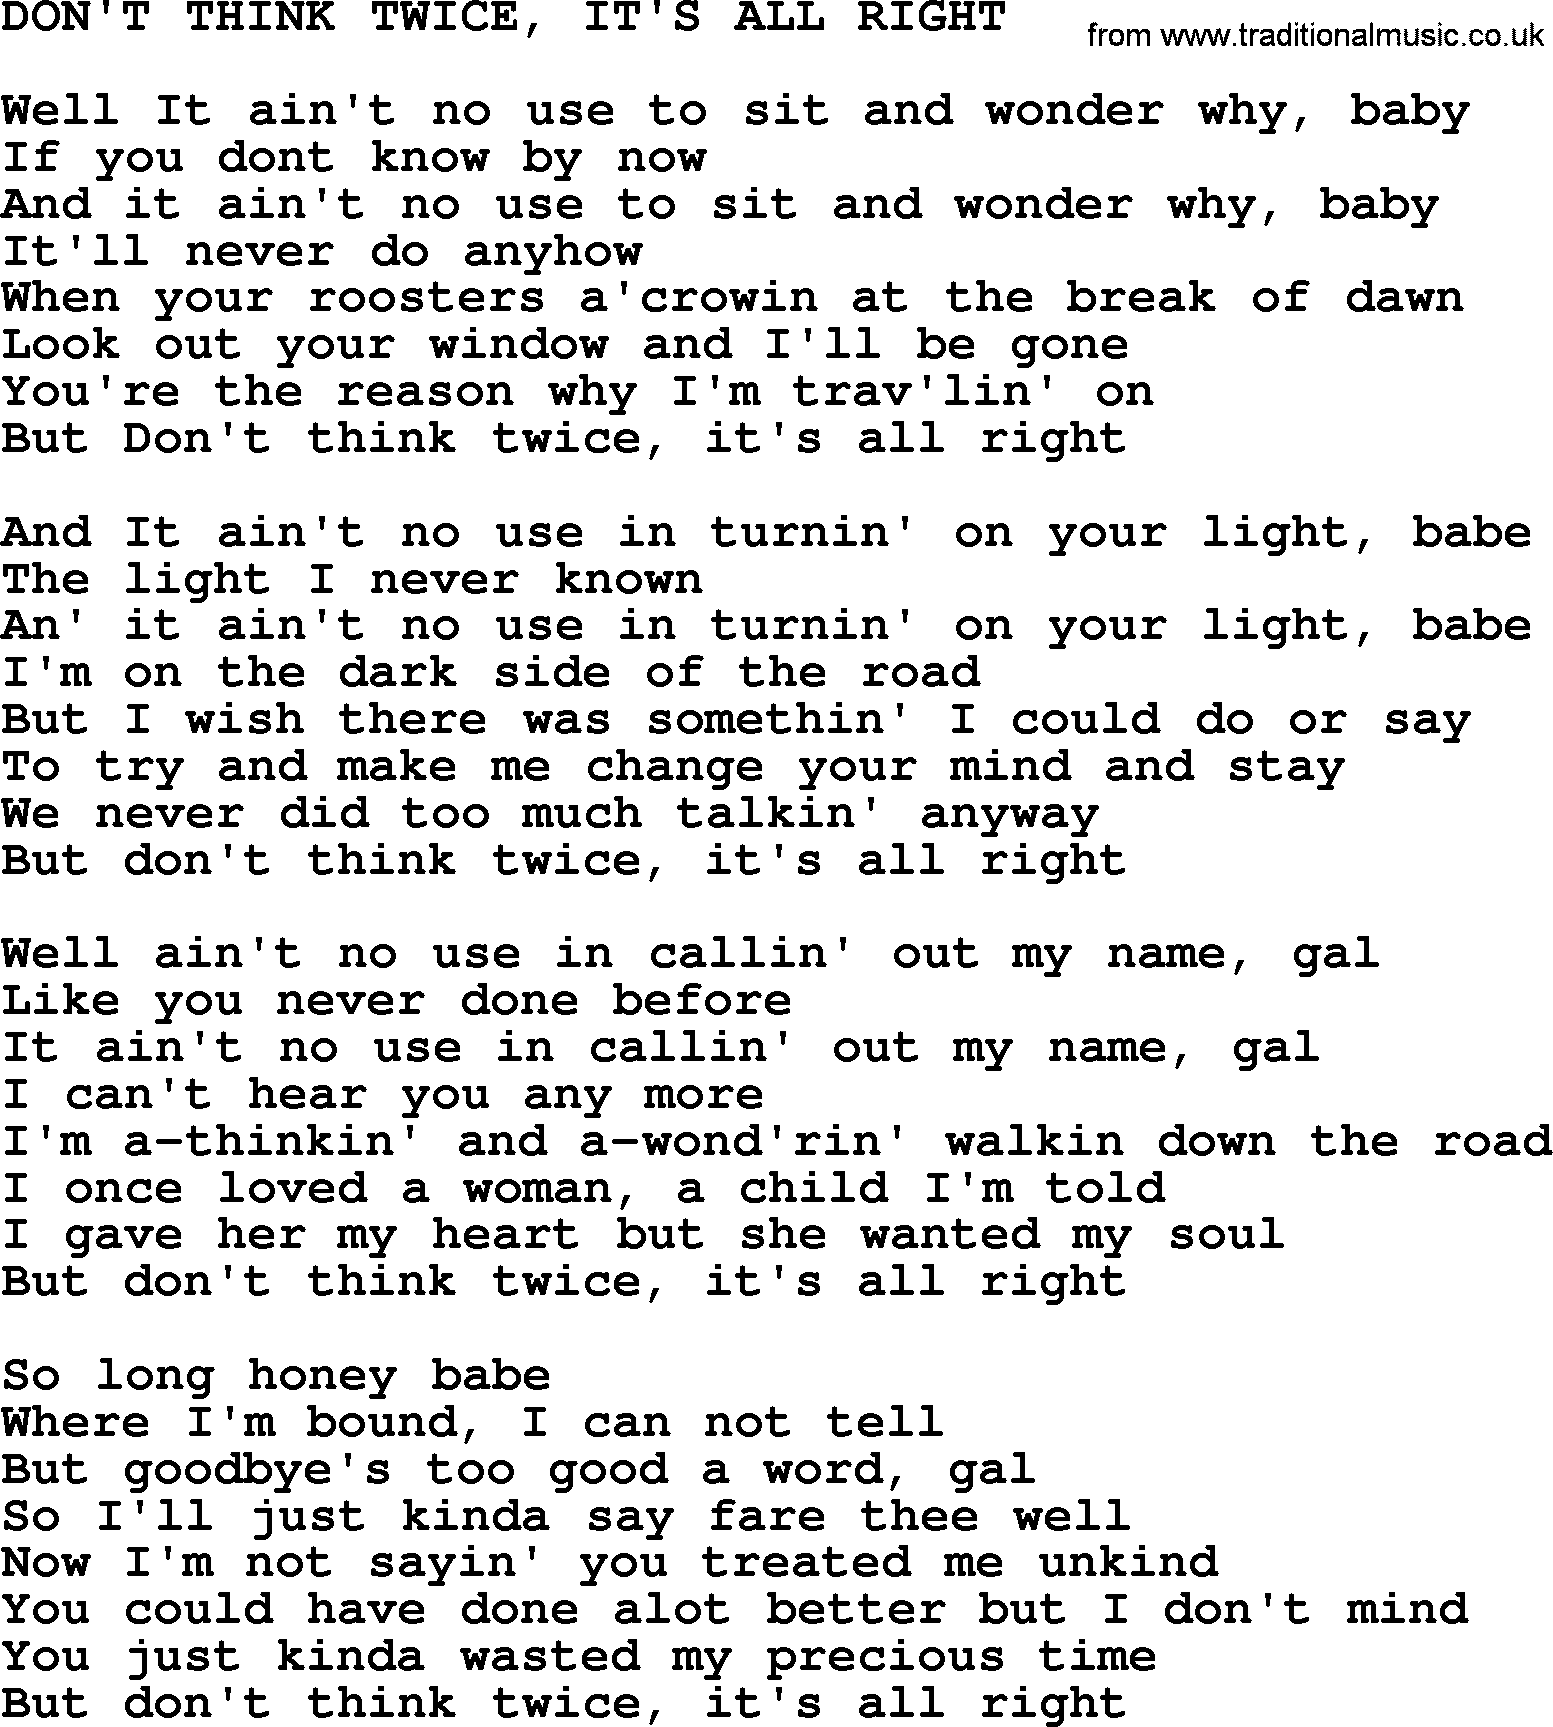 Johnny Cash song Don't Think Twice, It's All Right.txt lyrics